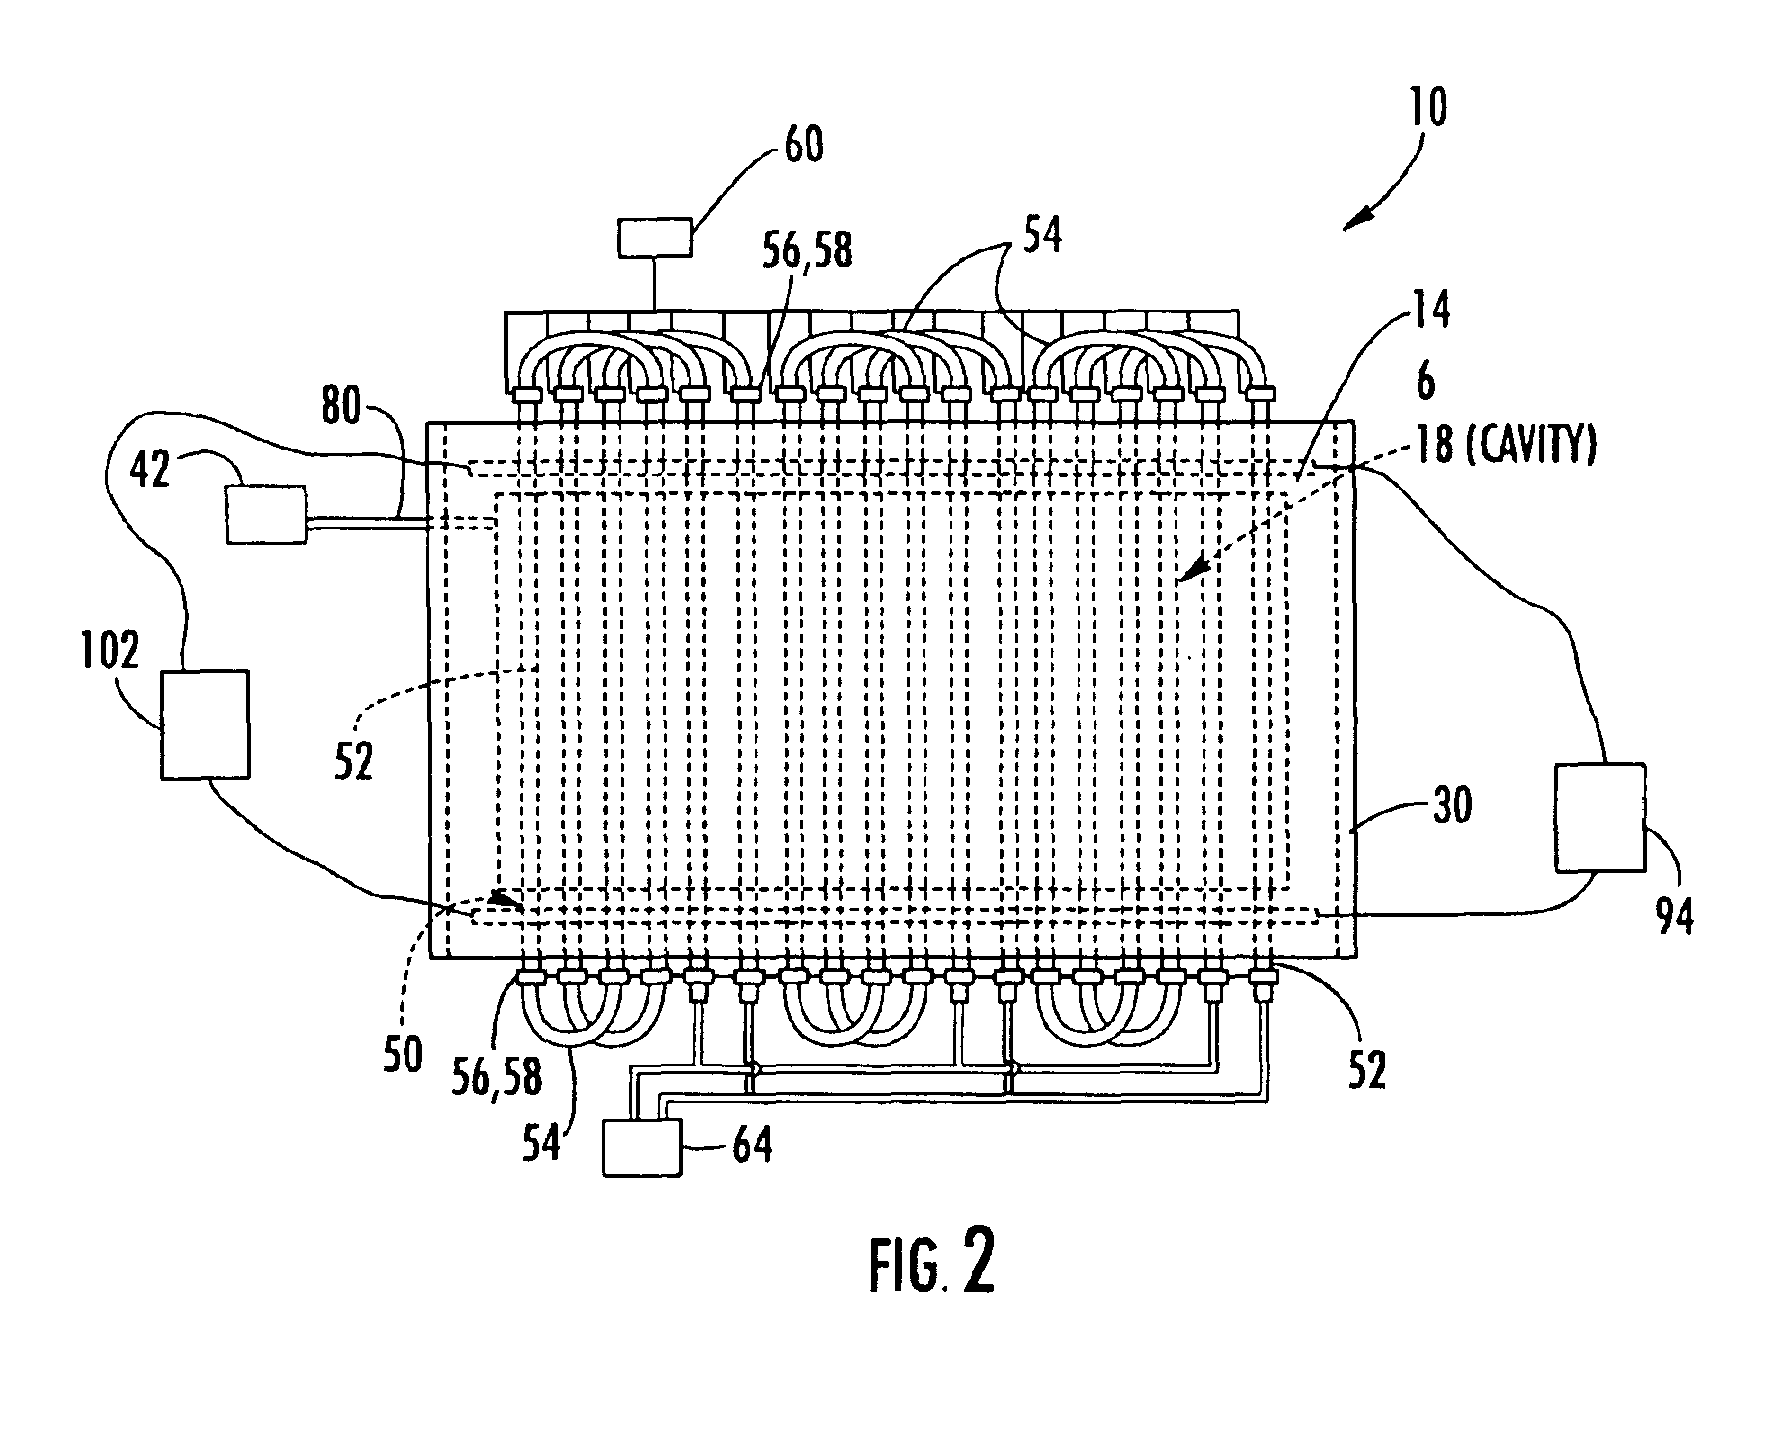 Susceptor connection system and associated apparatus and method